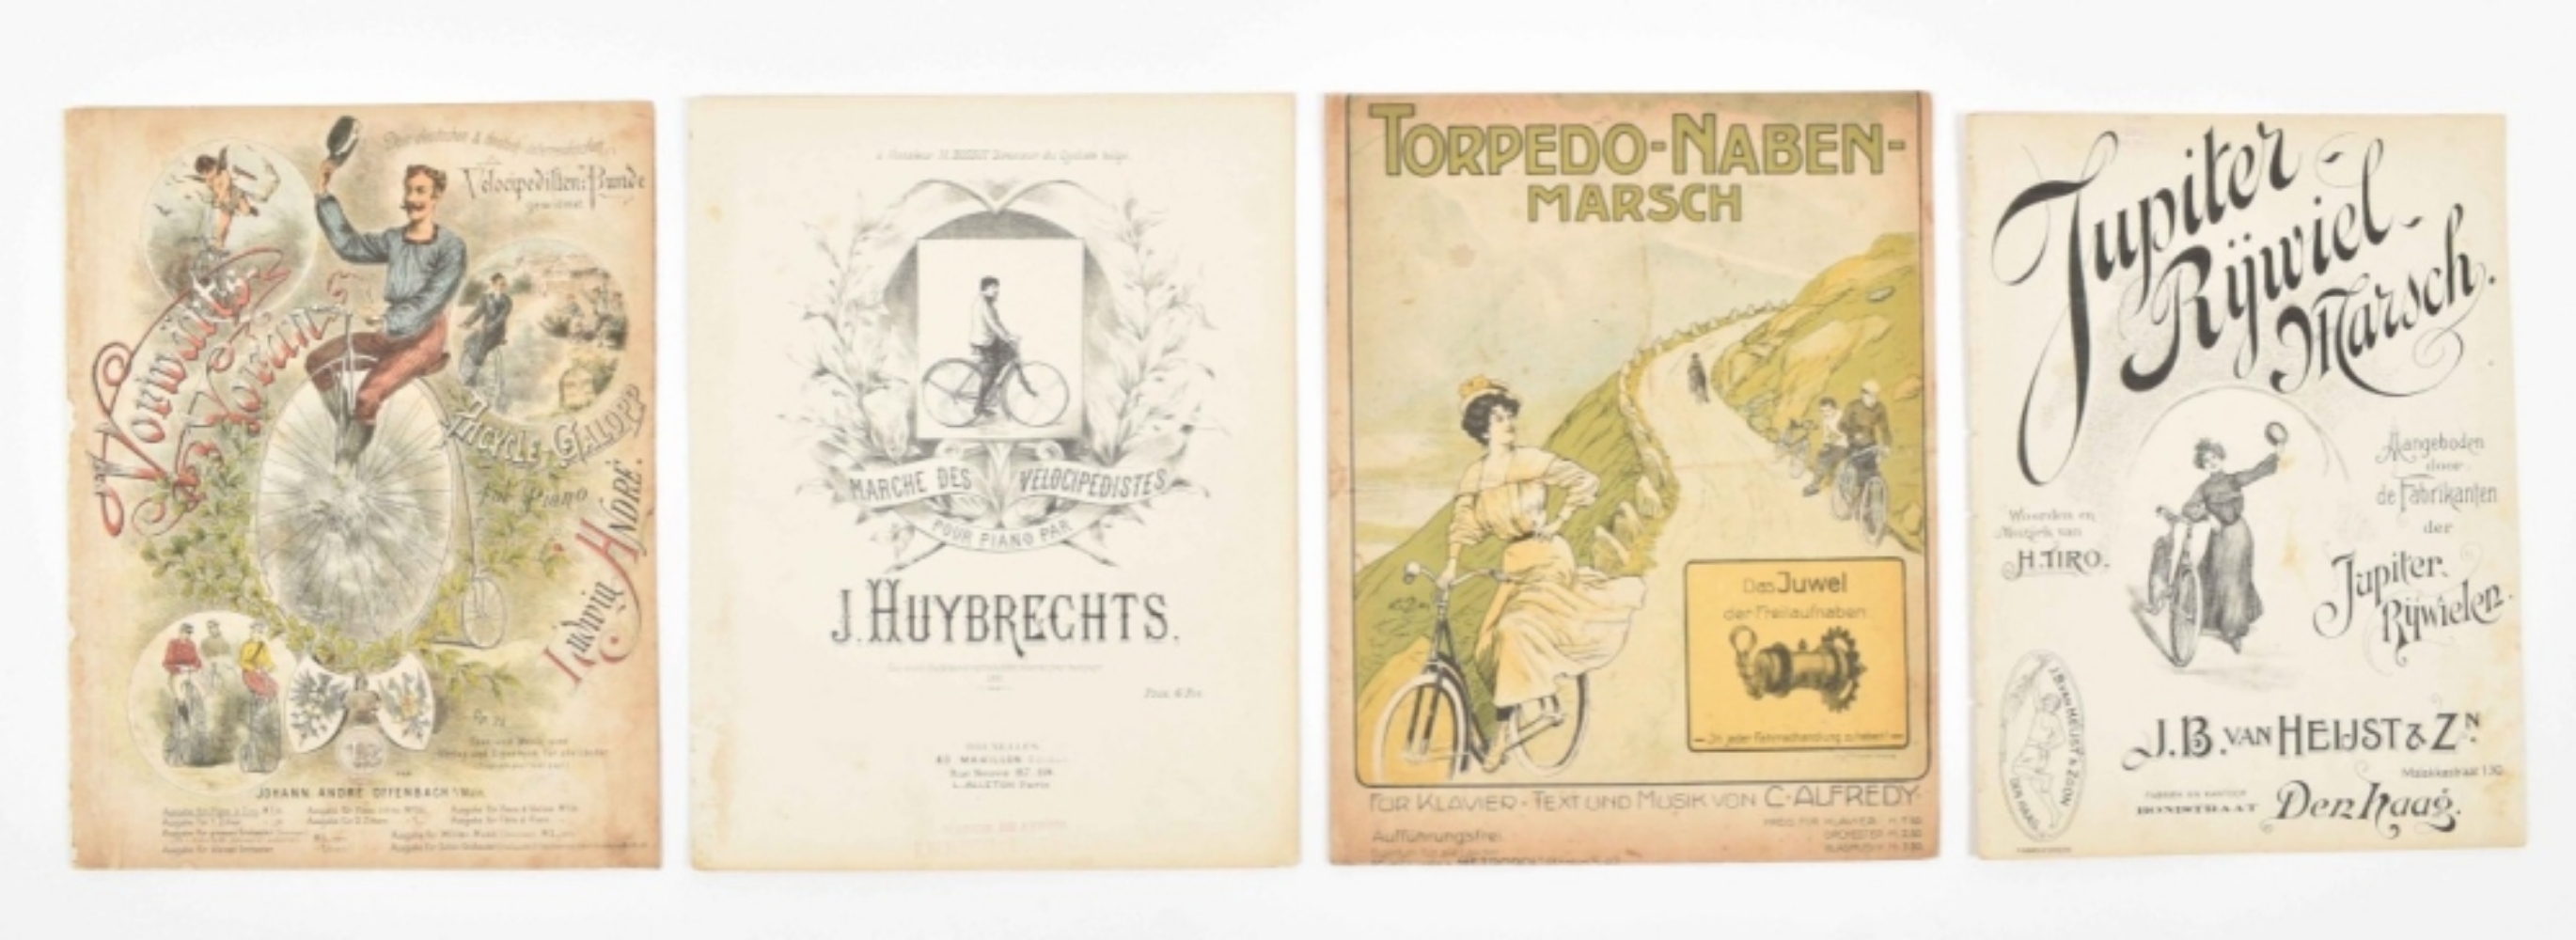 Collection of sheet music related to cycling - Image 2 of 8